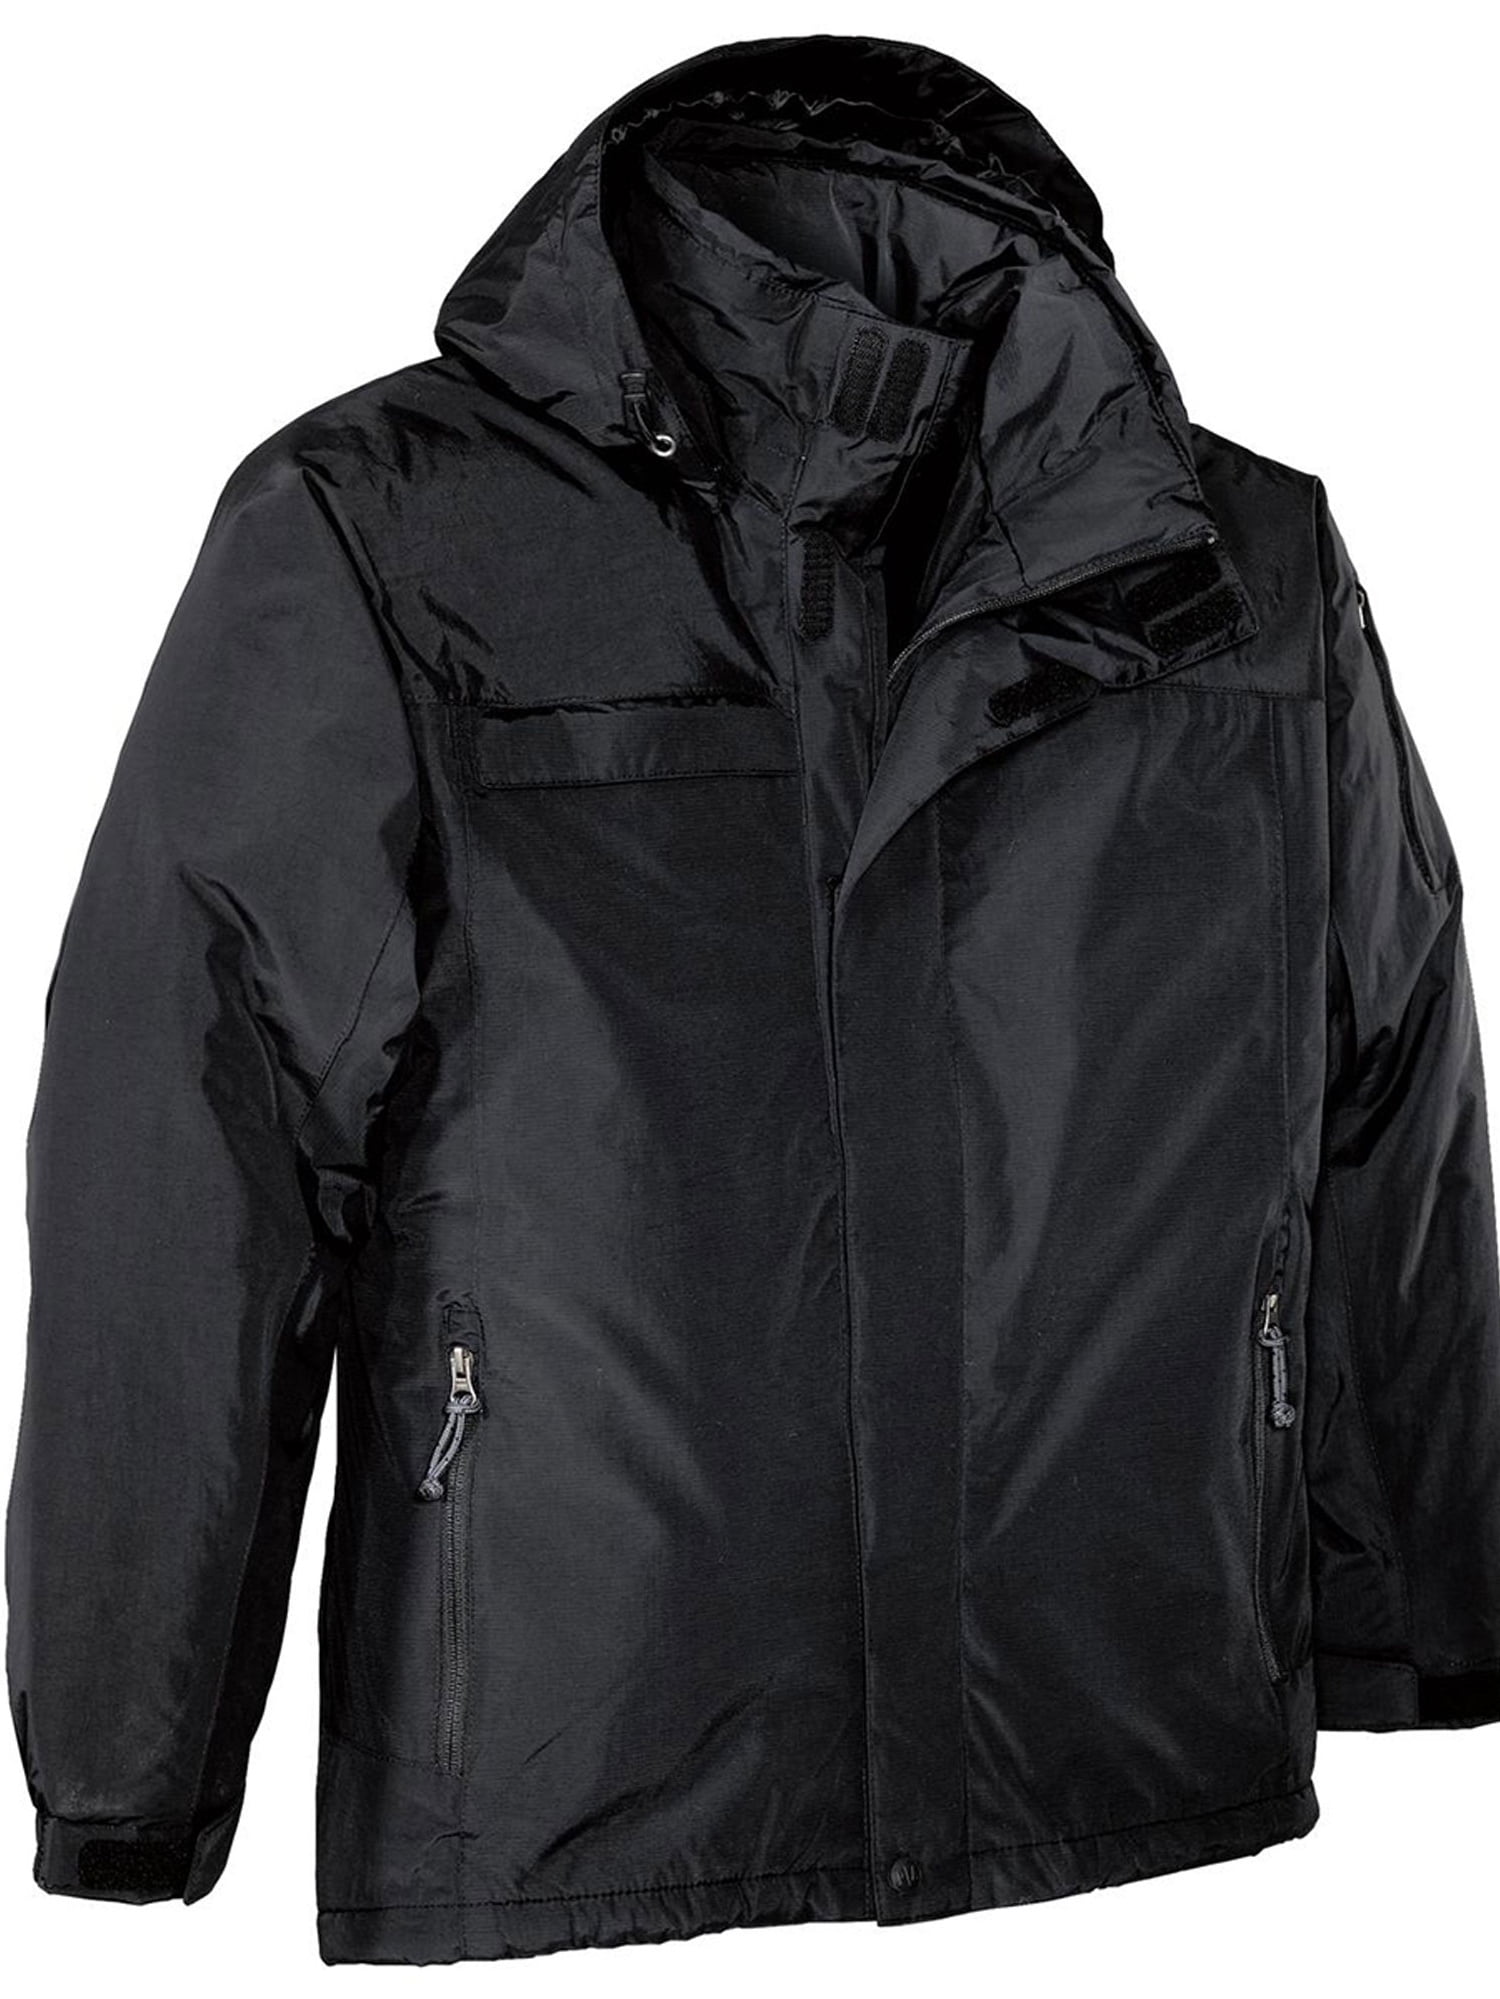 Port Authority - Port Authority Men's Big And Tall Waterproof Jacket ...